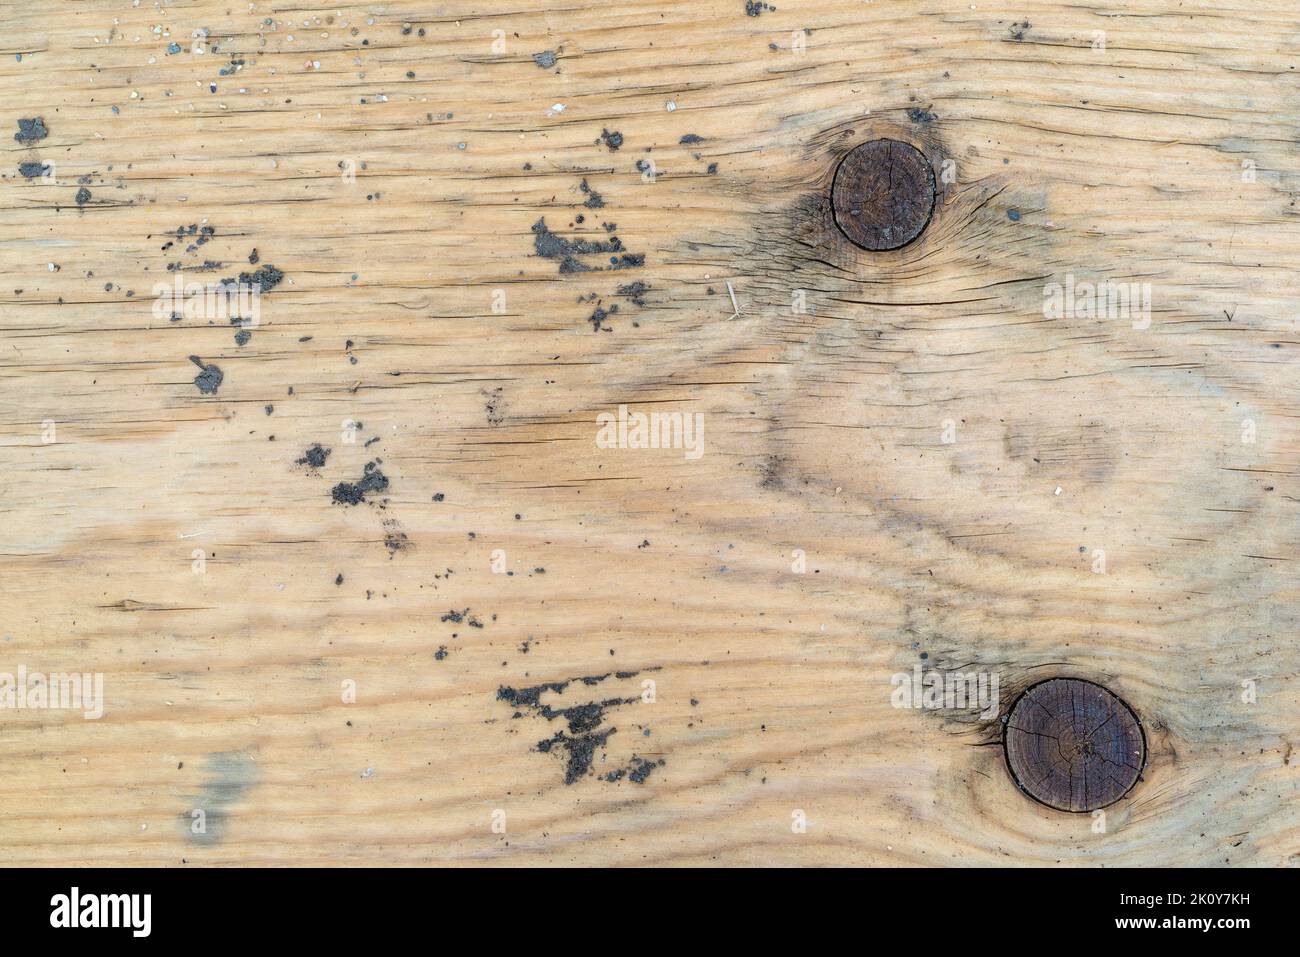 Top close view of a grungy old board that has been bleached with sunlight. Stock Photo